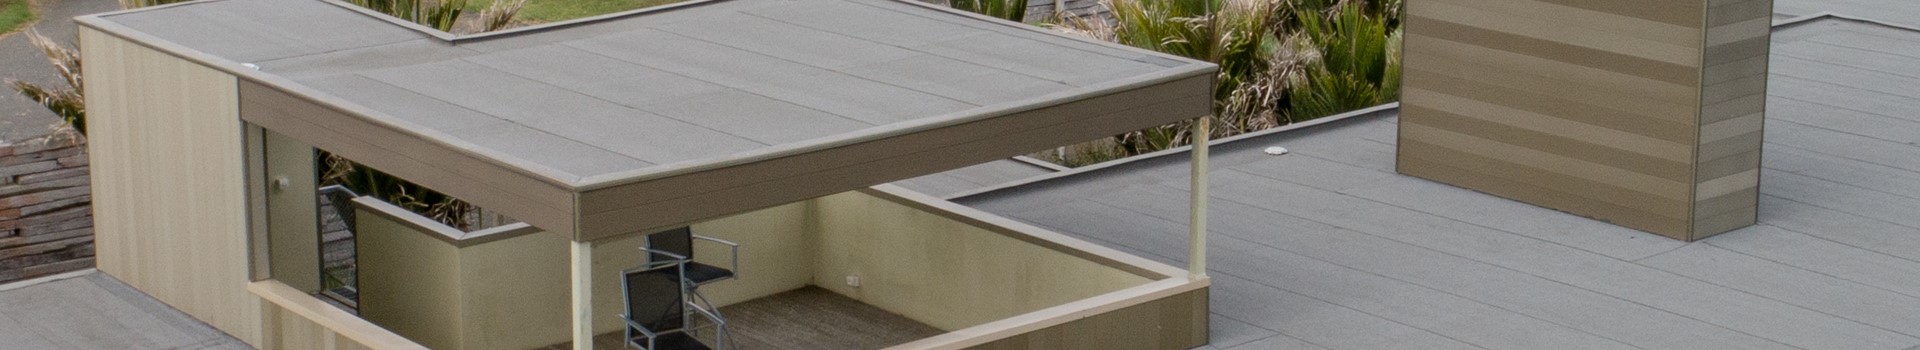 New Fully Engineered Warm Roof Solution Meets Updated H1 Requirements